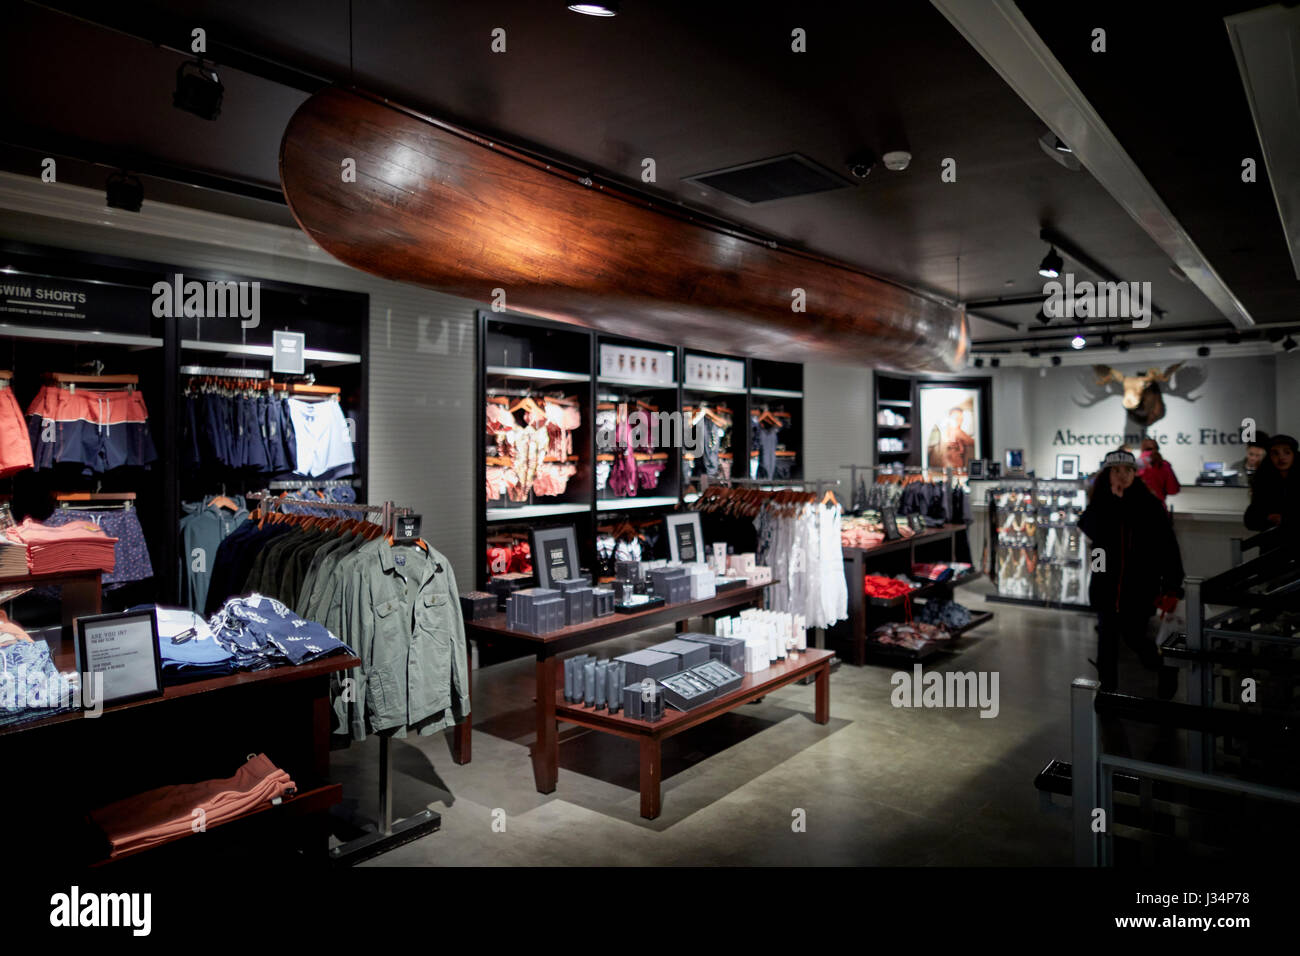 abercrombie and fitch inside store